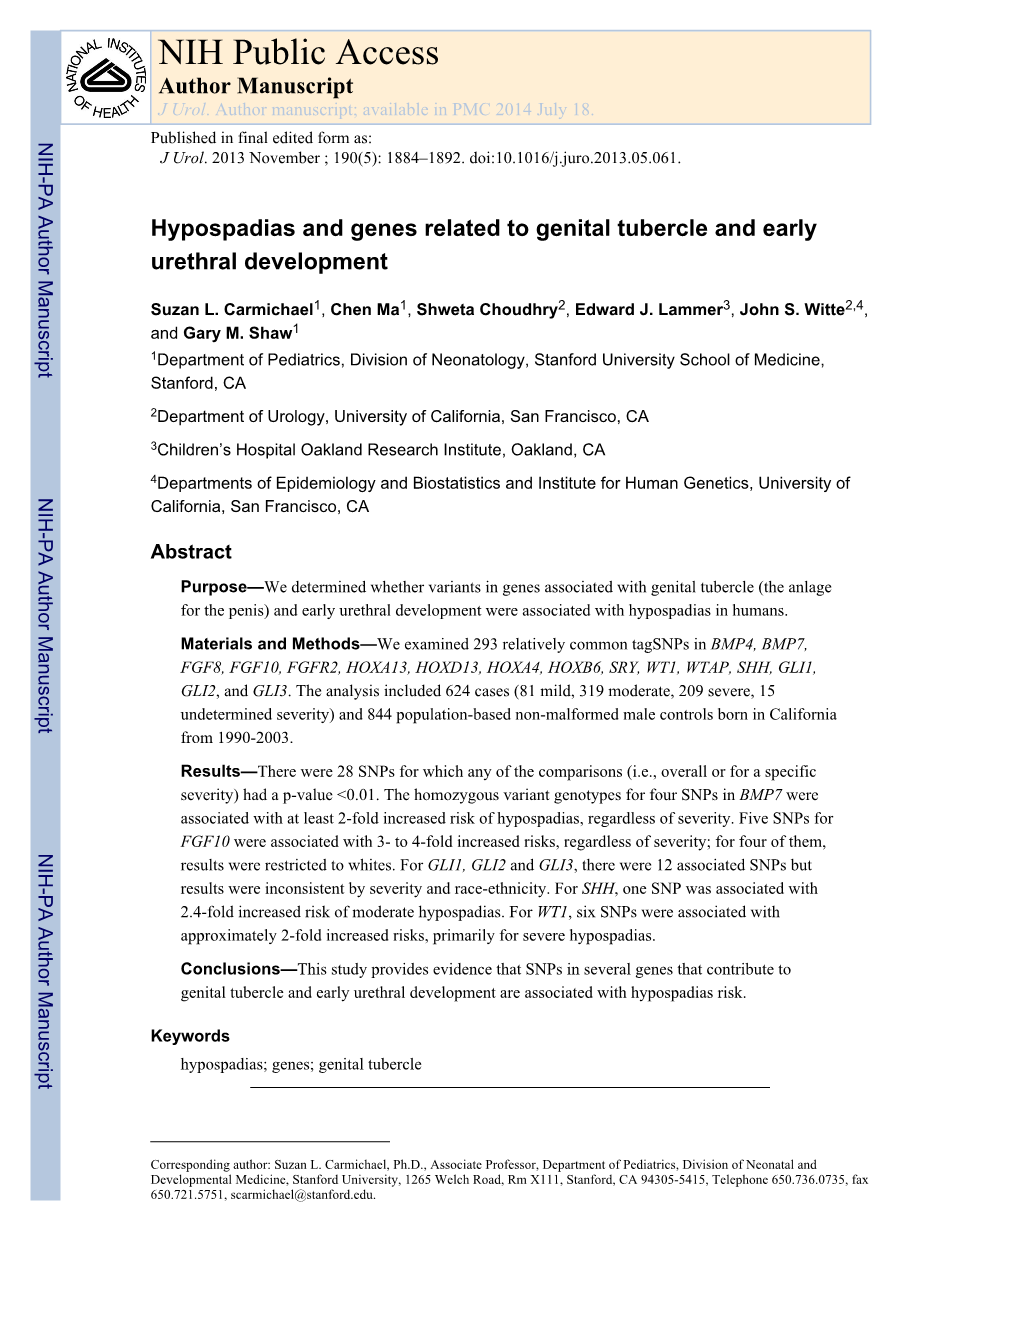 Hypospadias and Genes Related to Genital Tubercle and Early Urethral Development